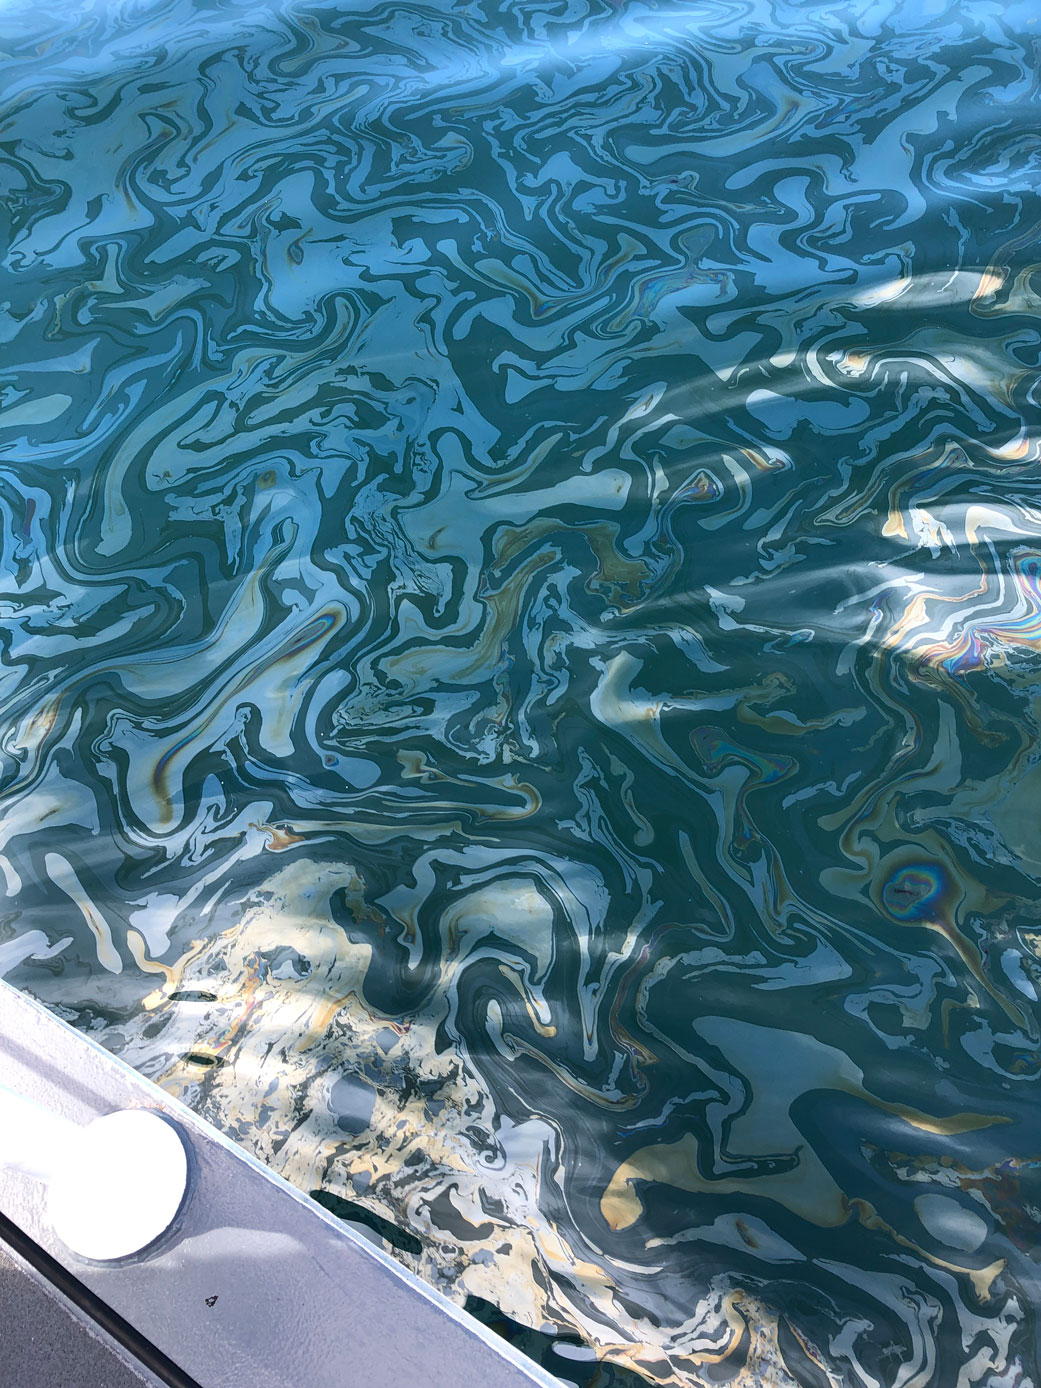 An oil slick on the surface of ocean water